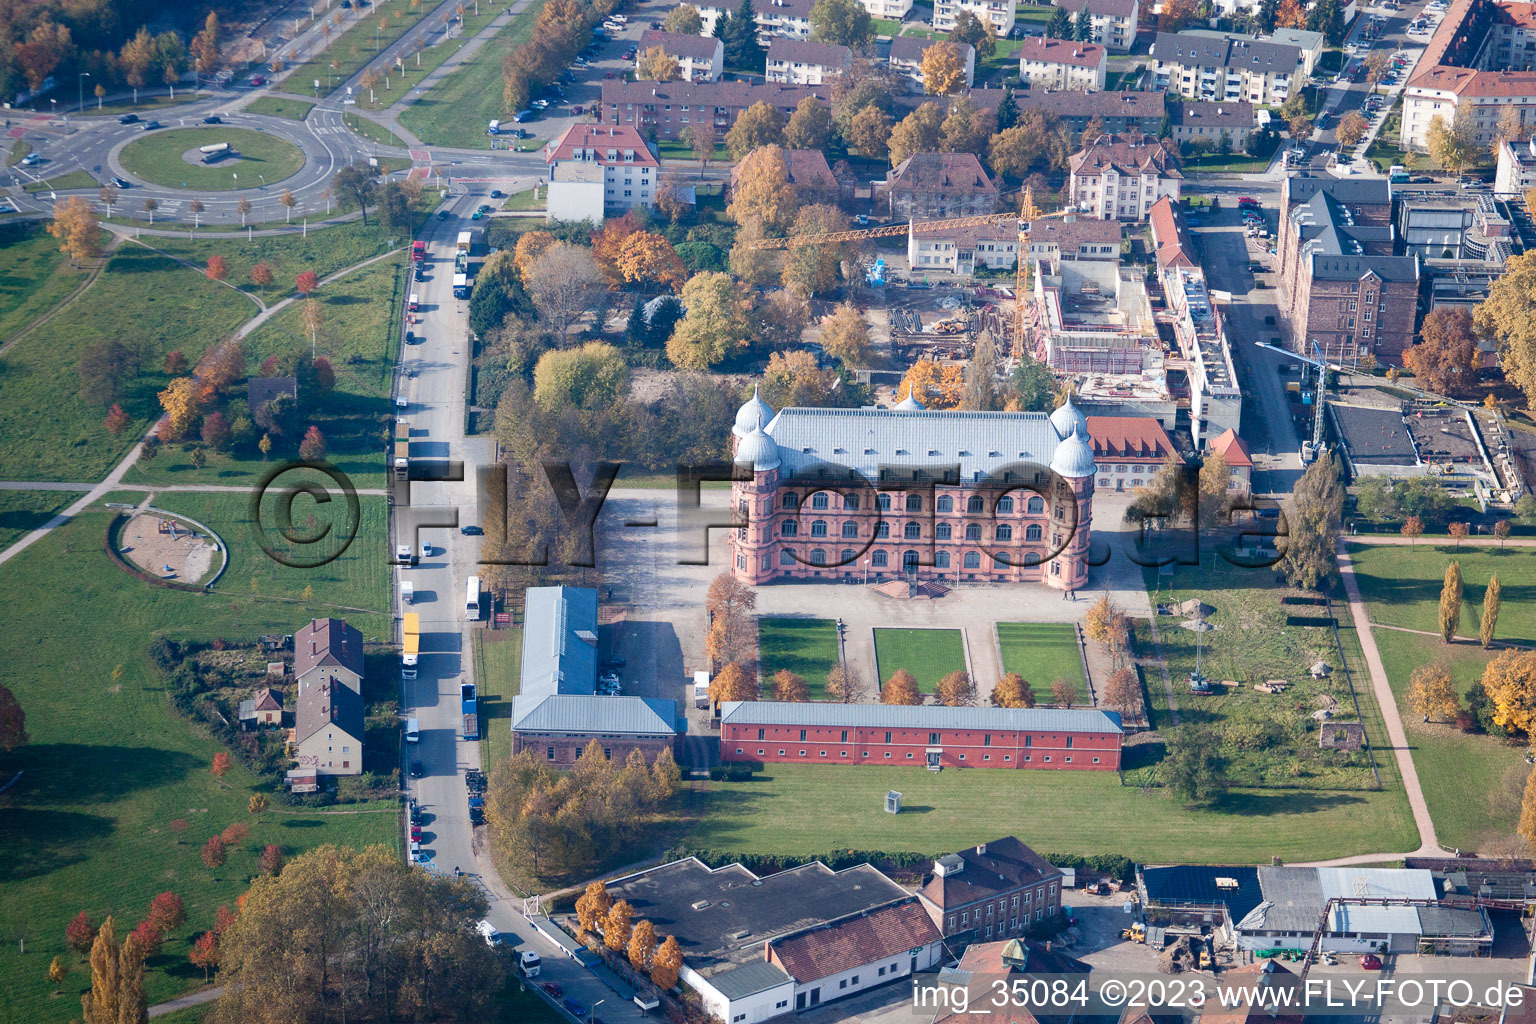 Aerial view of Gottesaue Castle (Music University) in the district Oststadt in Karlsruhe in the state Baden-Wuerttemberg, Germany